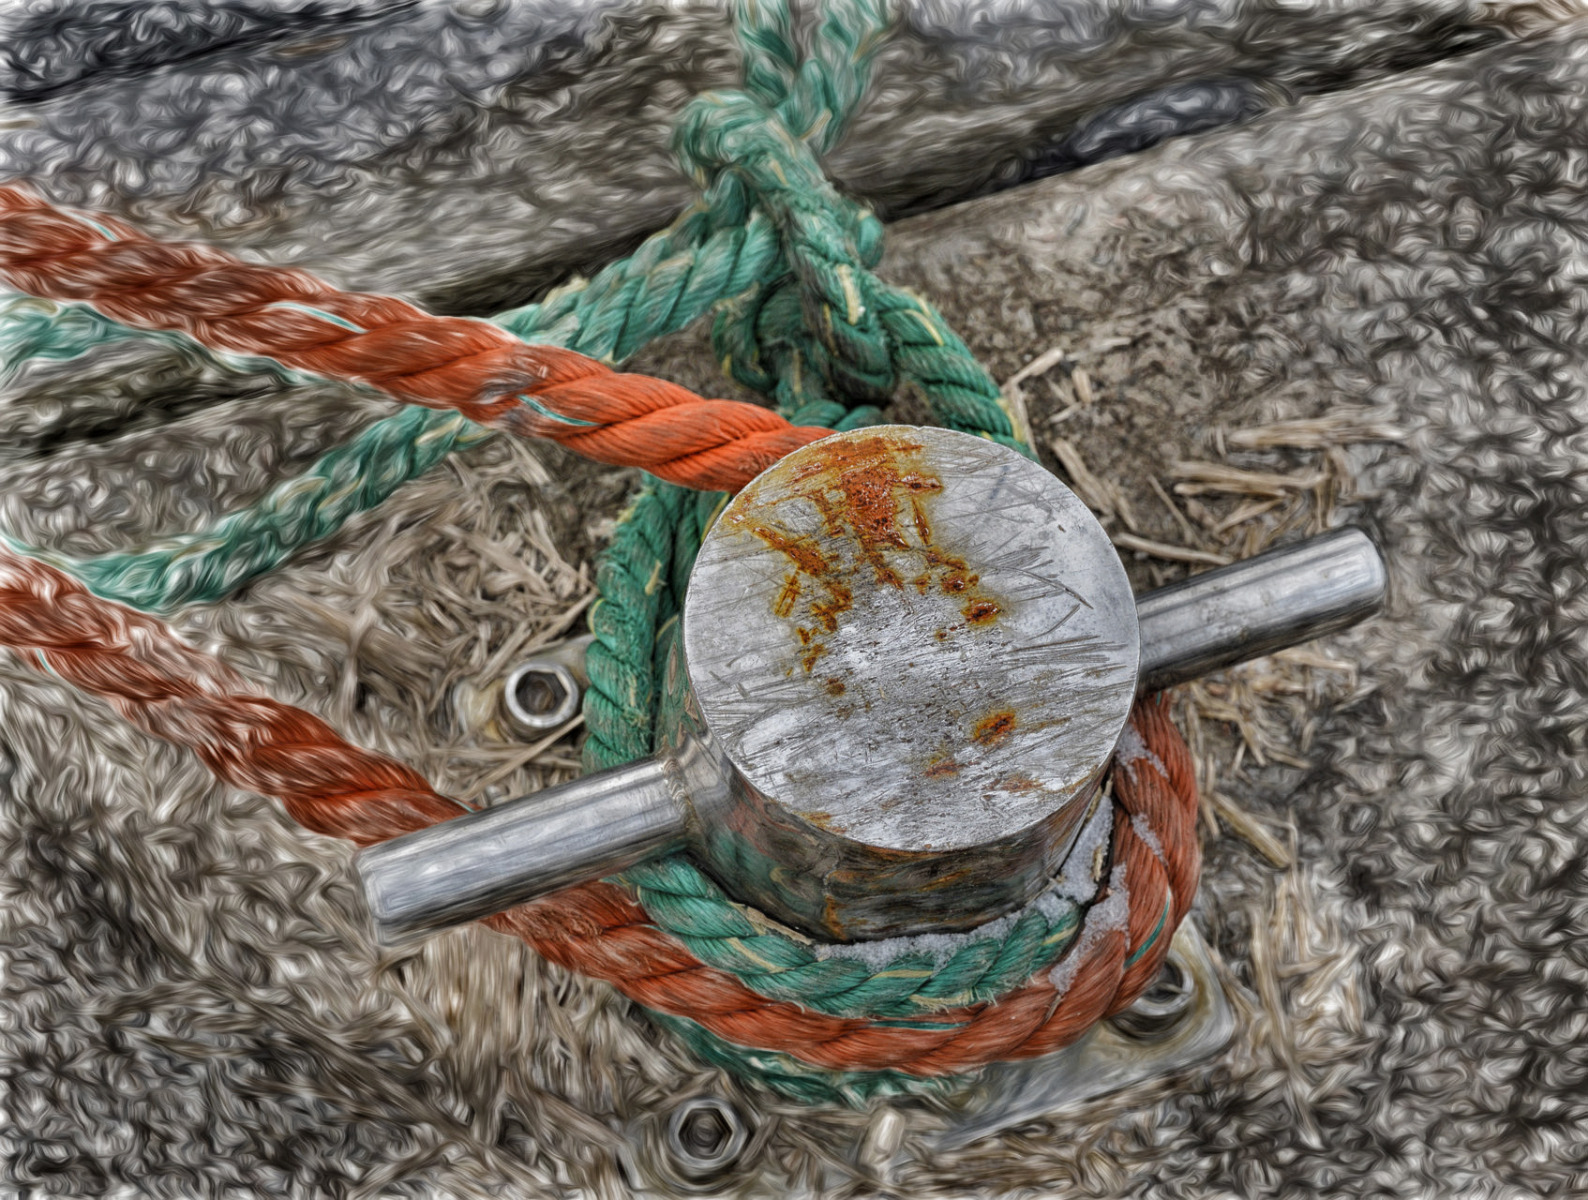 Rope and Cleat - Kathy Wall - NMPC